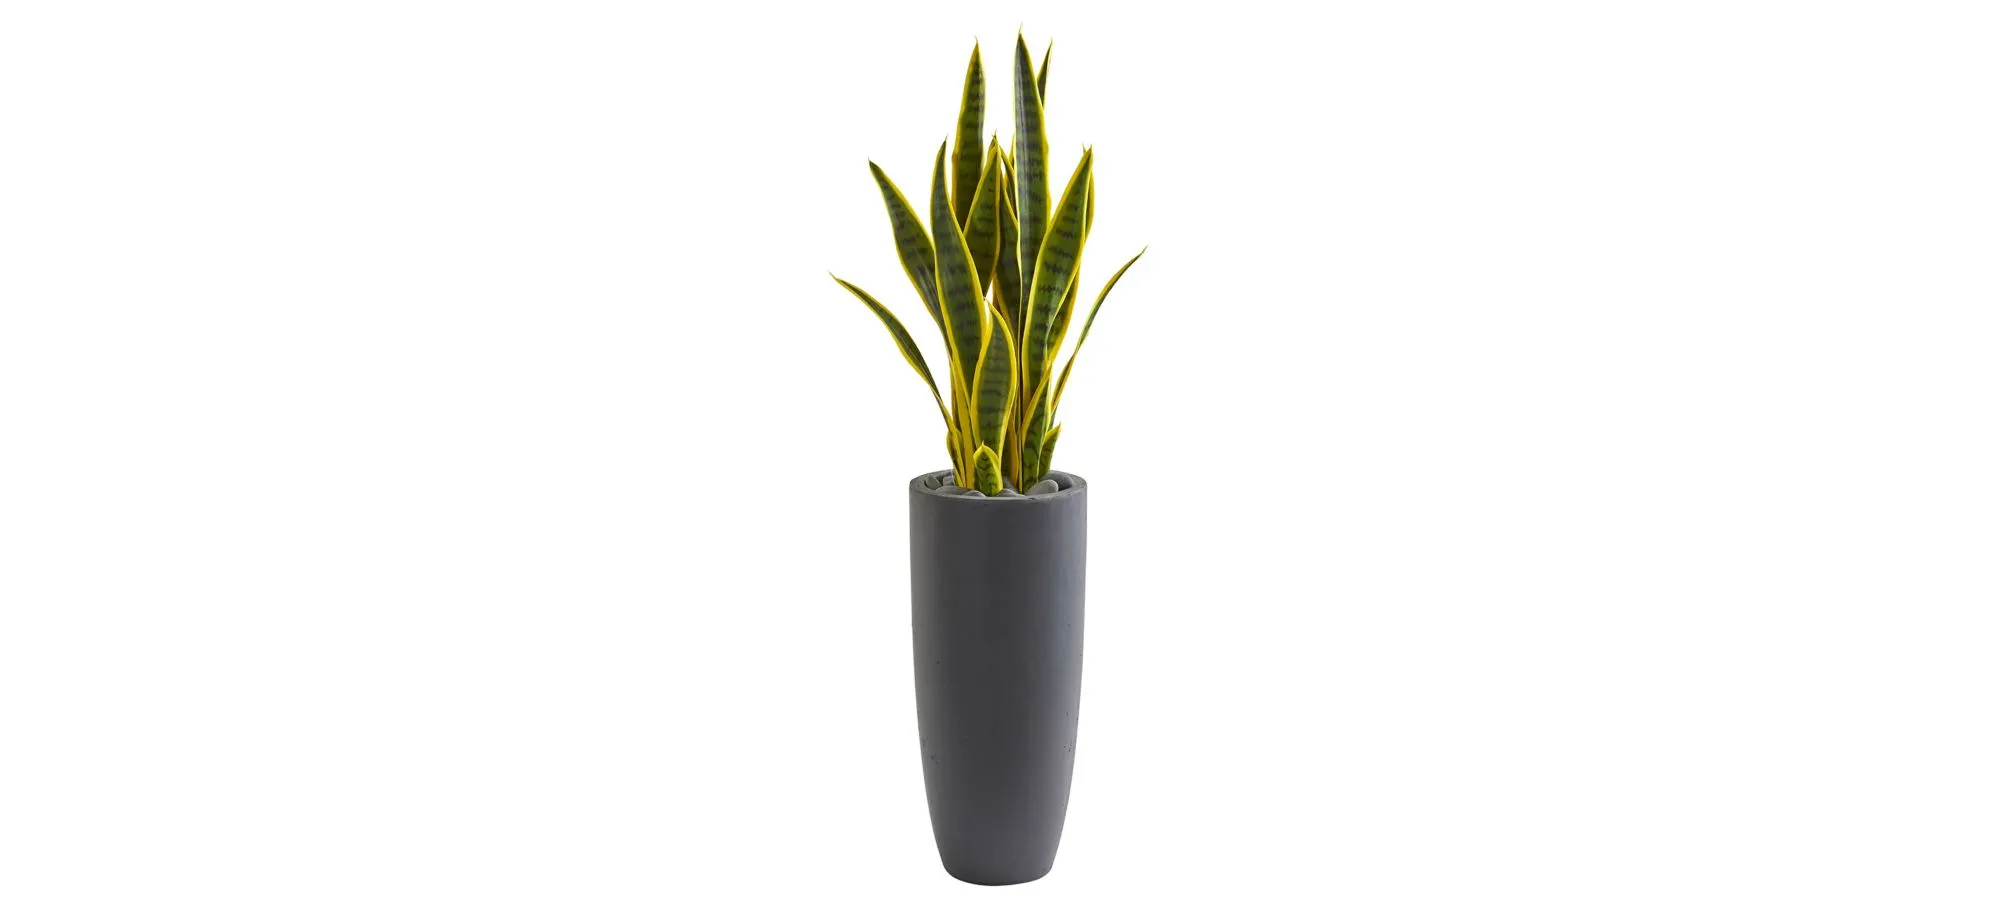 3ft. Sansevieria Artificial Plant in Gray Bullet Planter in Green by Bellanest